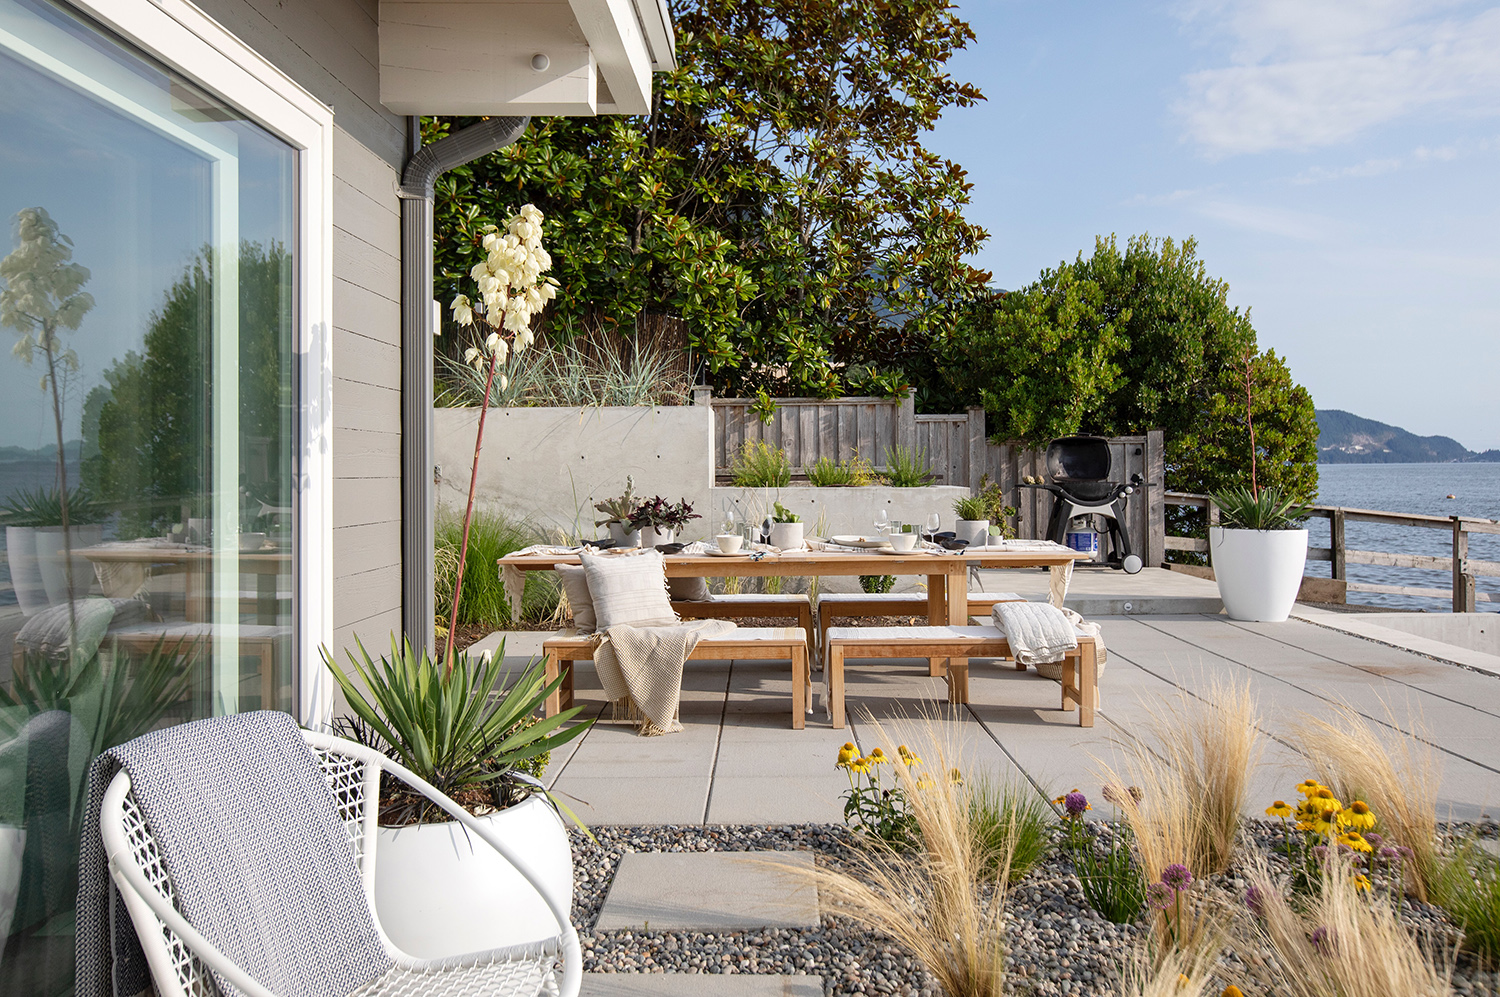 Decorating Your Outdoor Space